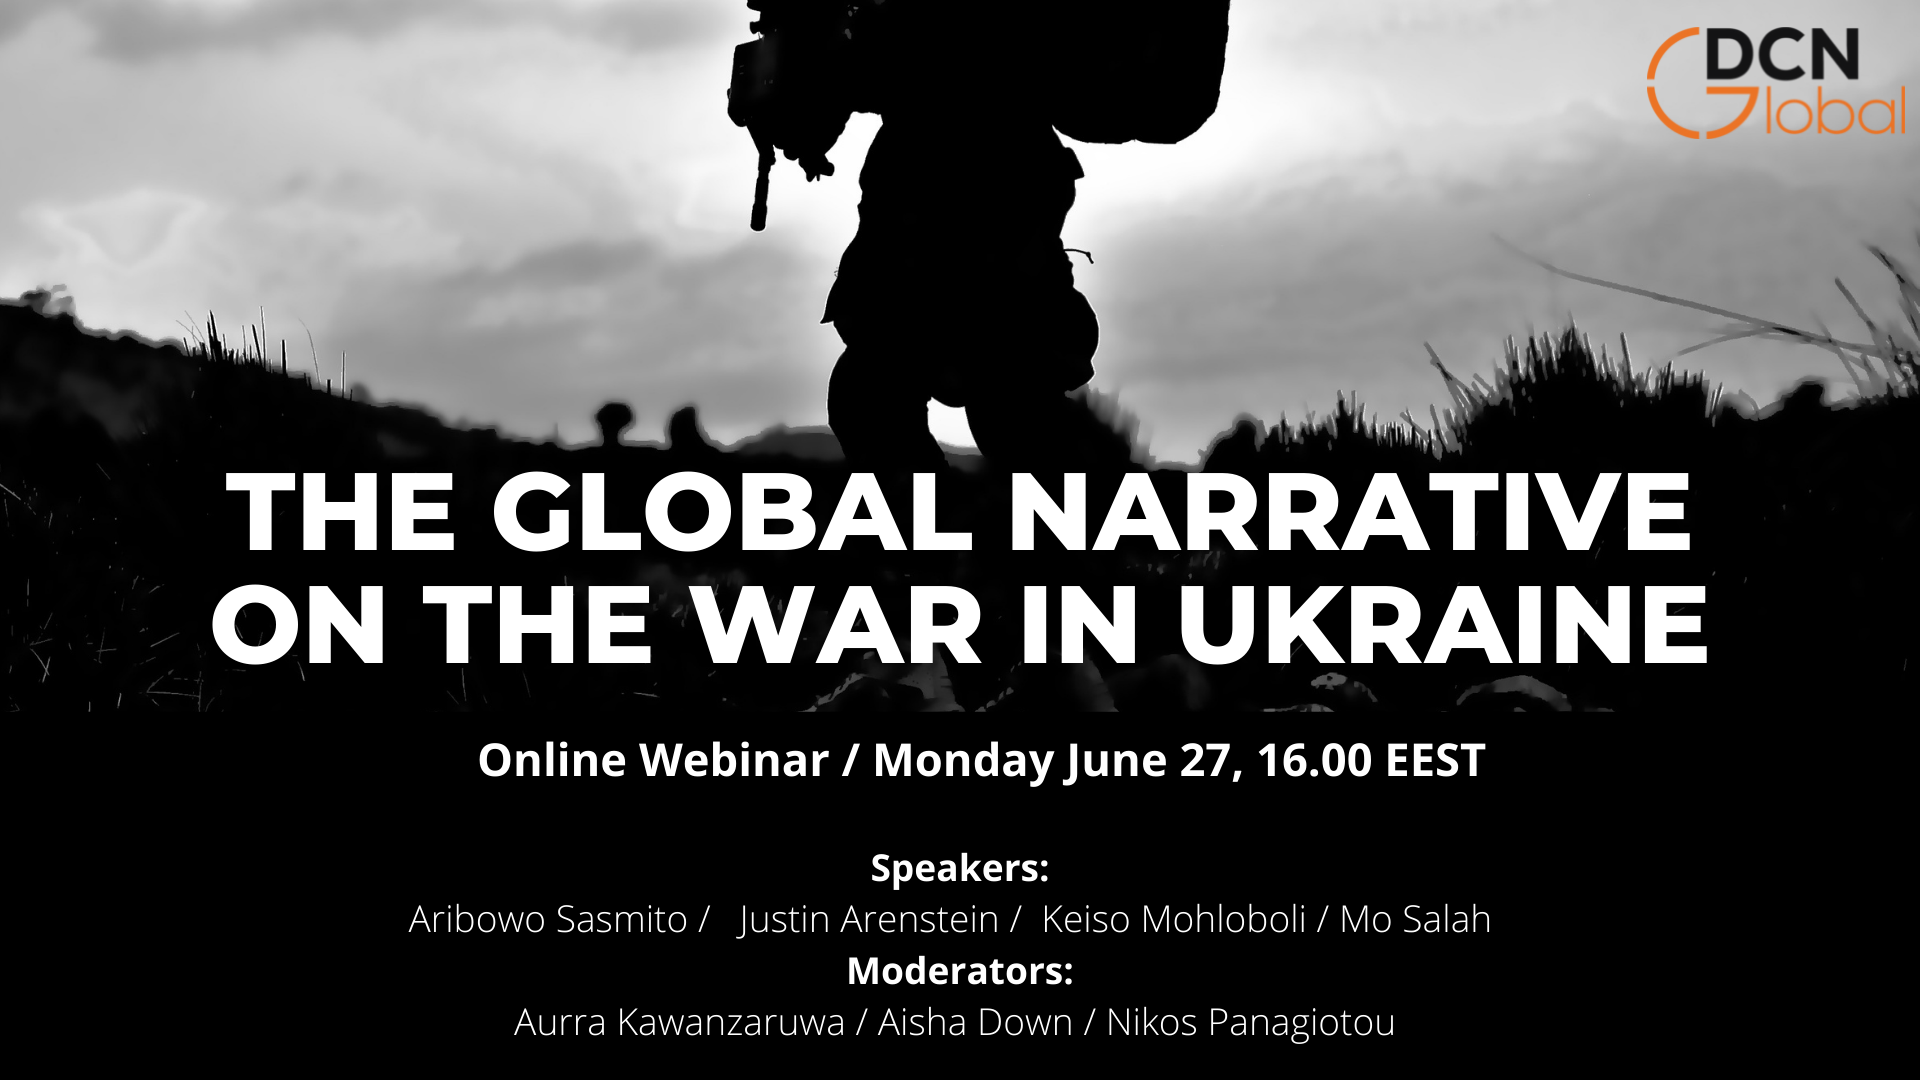 The Global Narrative on the War in Ukraine